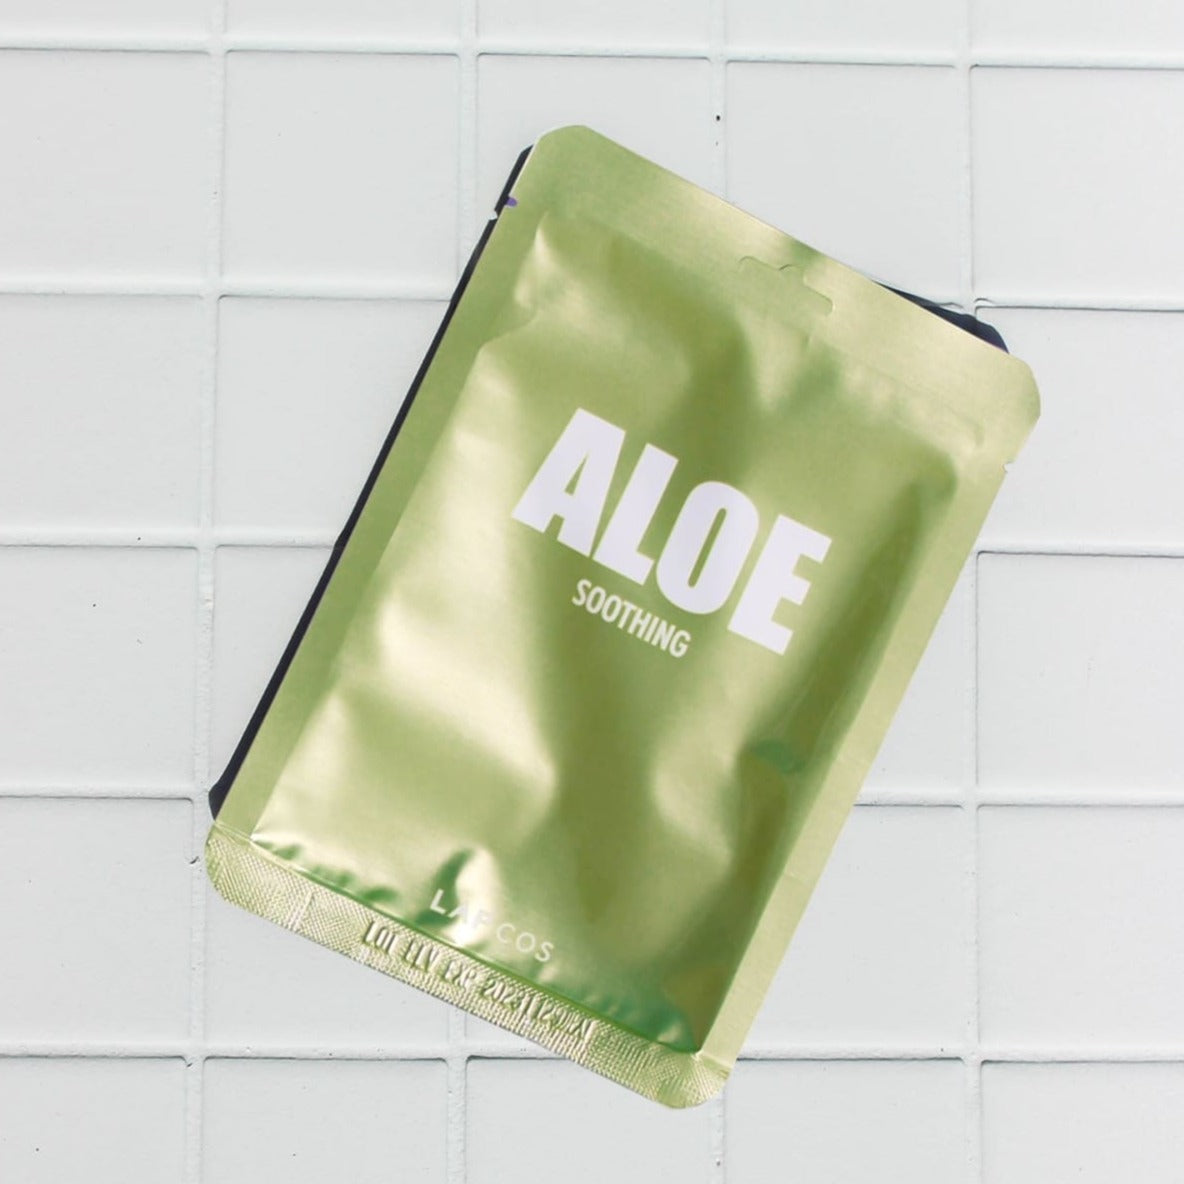 Lapcos Skin Mask Aloe Soothing A00fs043 Groupbycolor